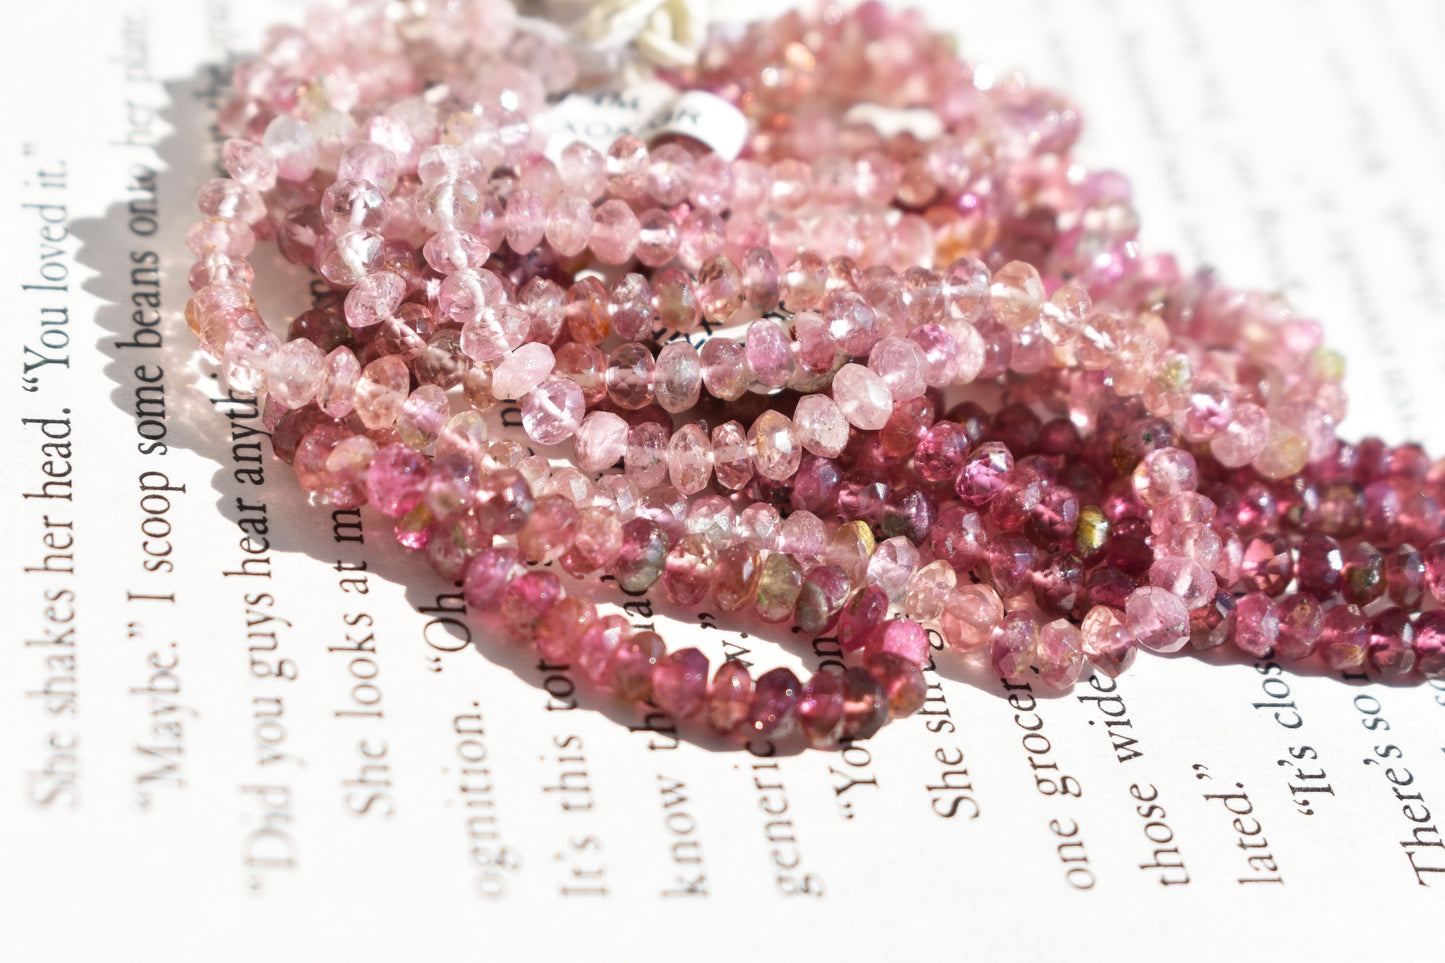 Ombre Tourmaline Pink Rondelle Beads 3.5-4mm - Orange & Grey-Blue Inclusions